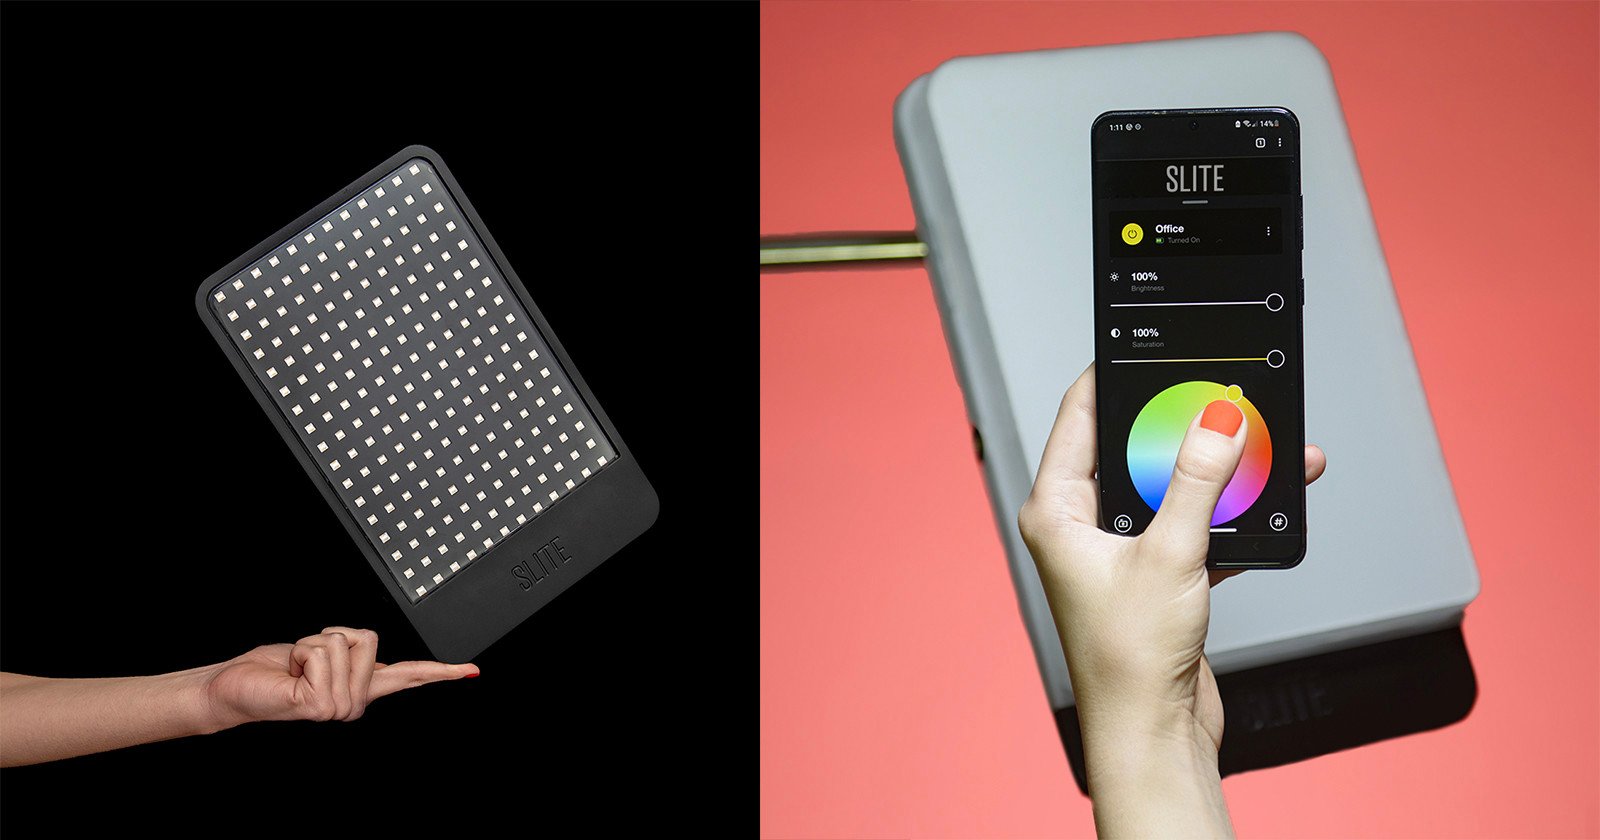 The Slite LED Panel is Ultra Thin, Yet Super-Bright and Color Accurate